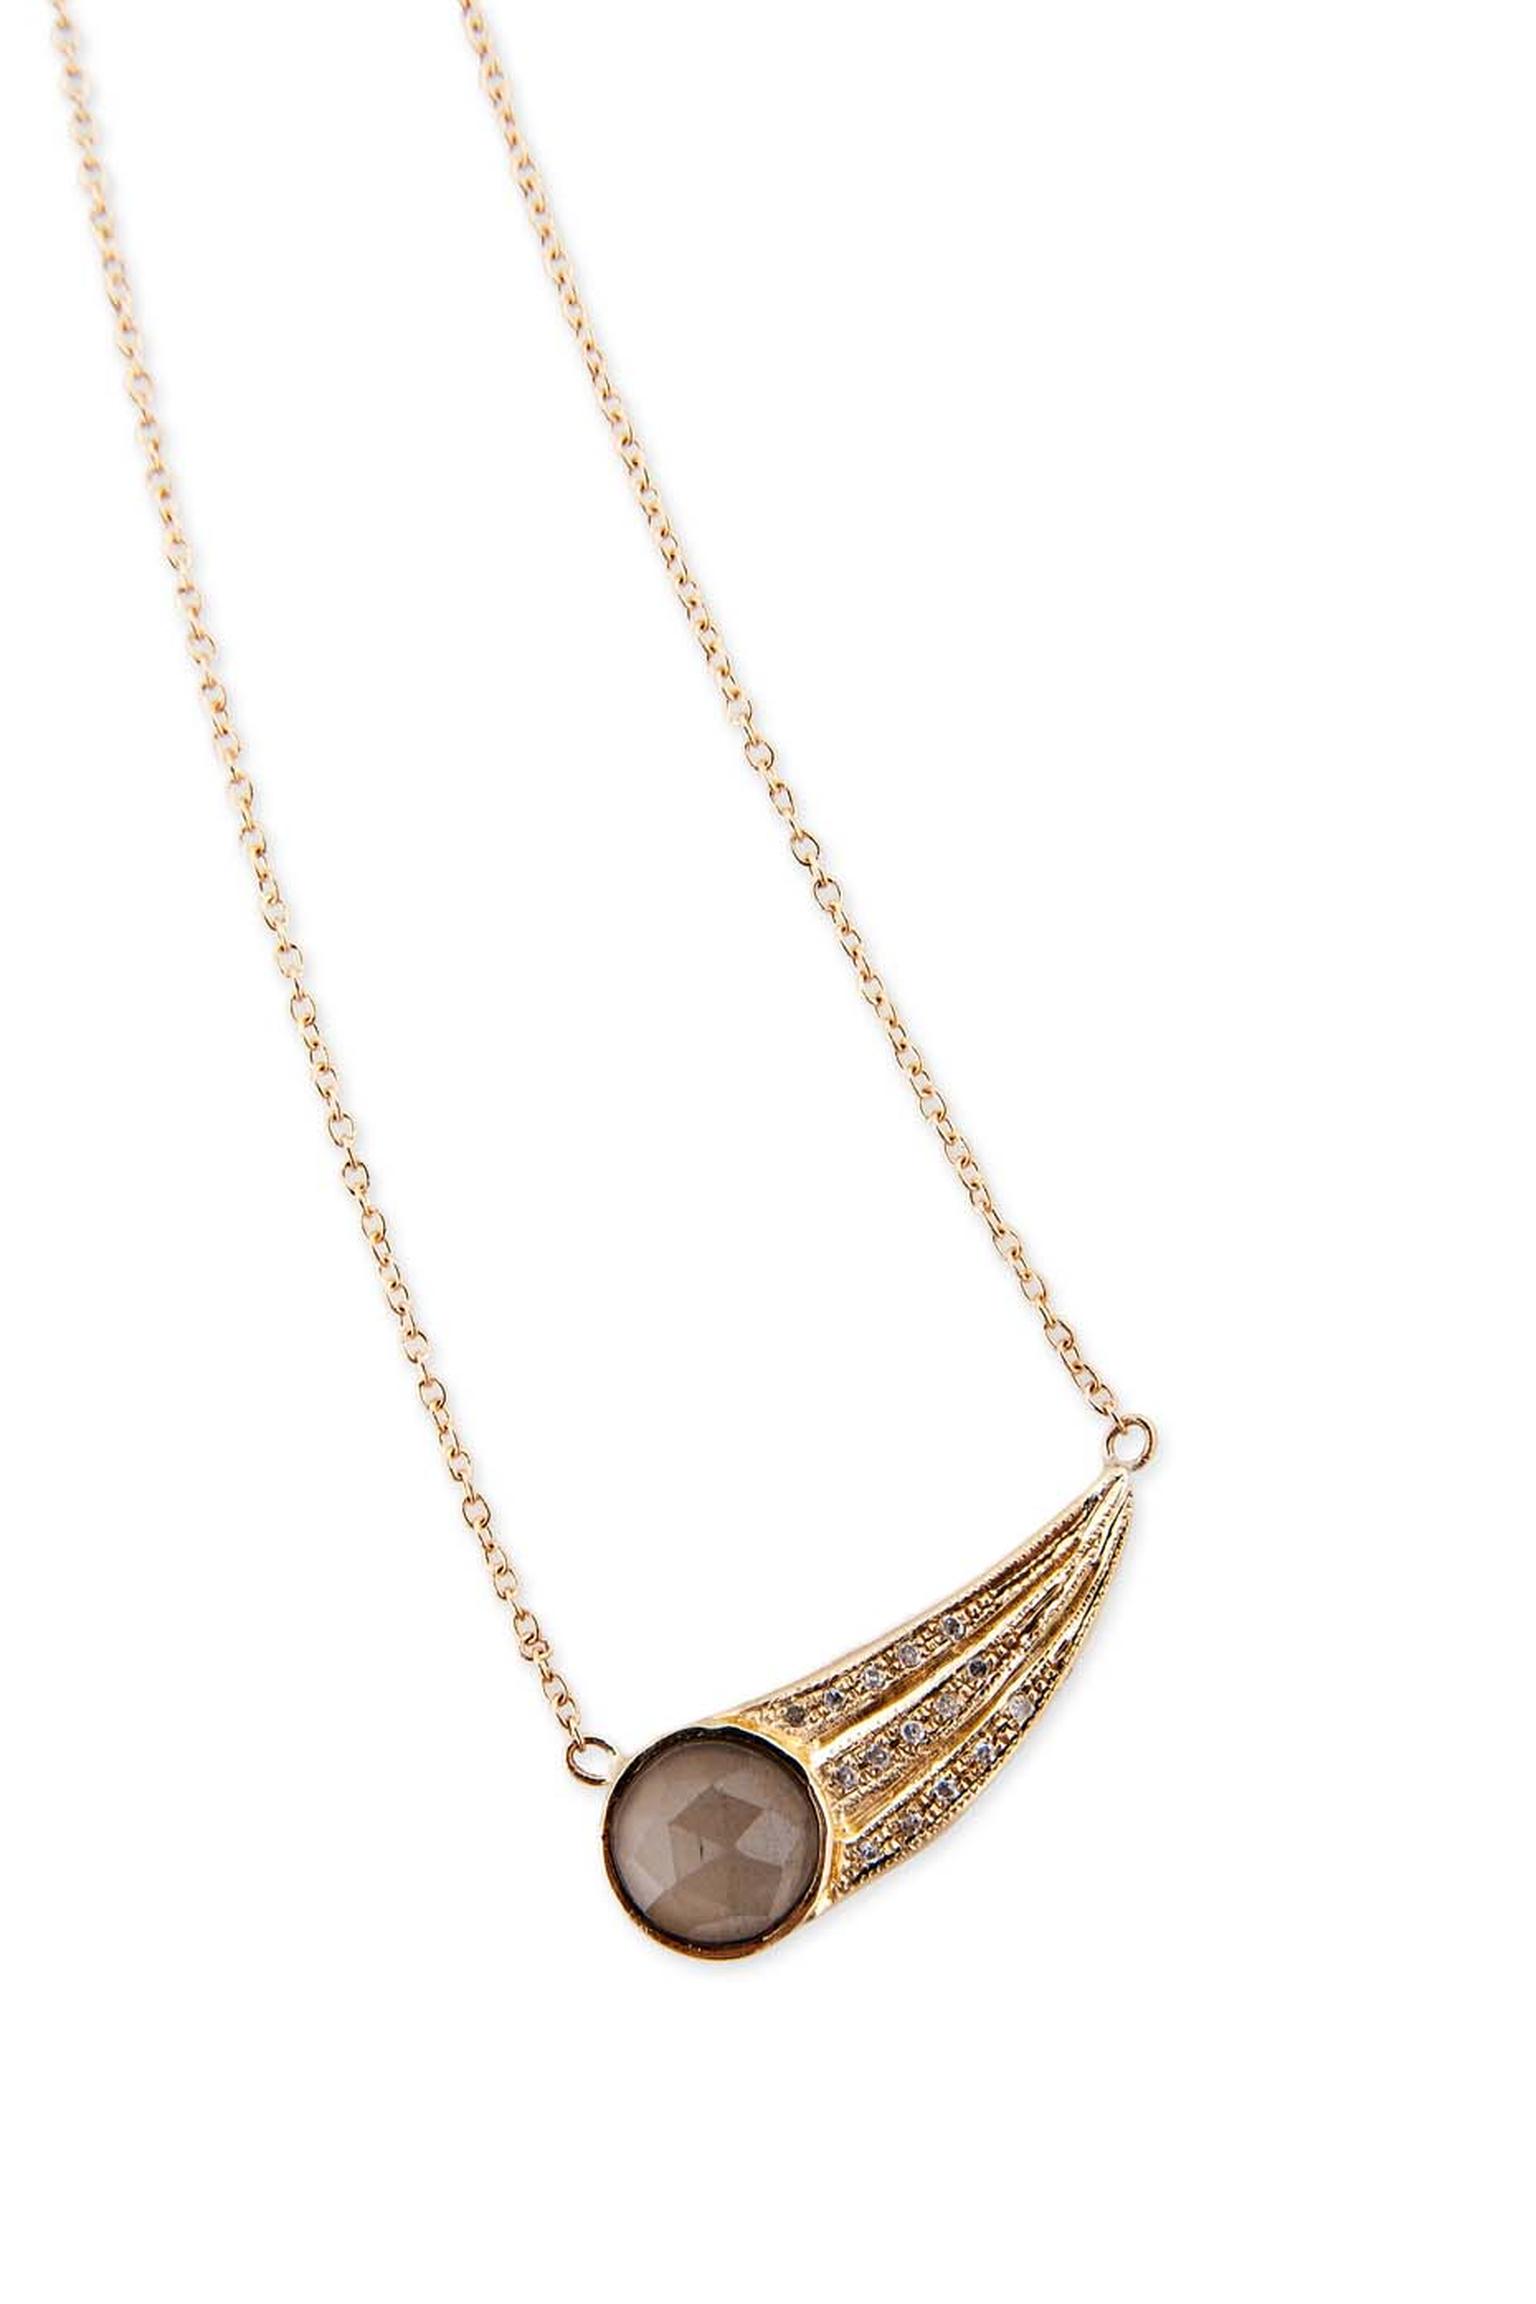 Jacquie Aiche yellow gold Rounded Wing necklace with pavé diamonds and labradorite.